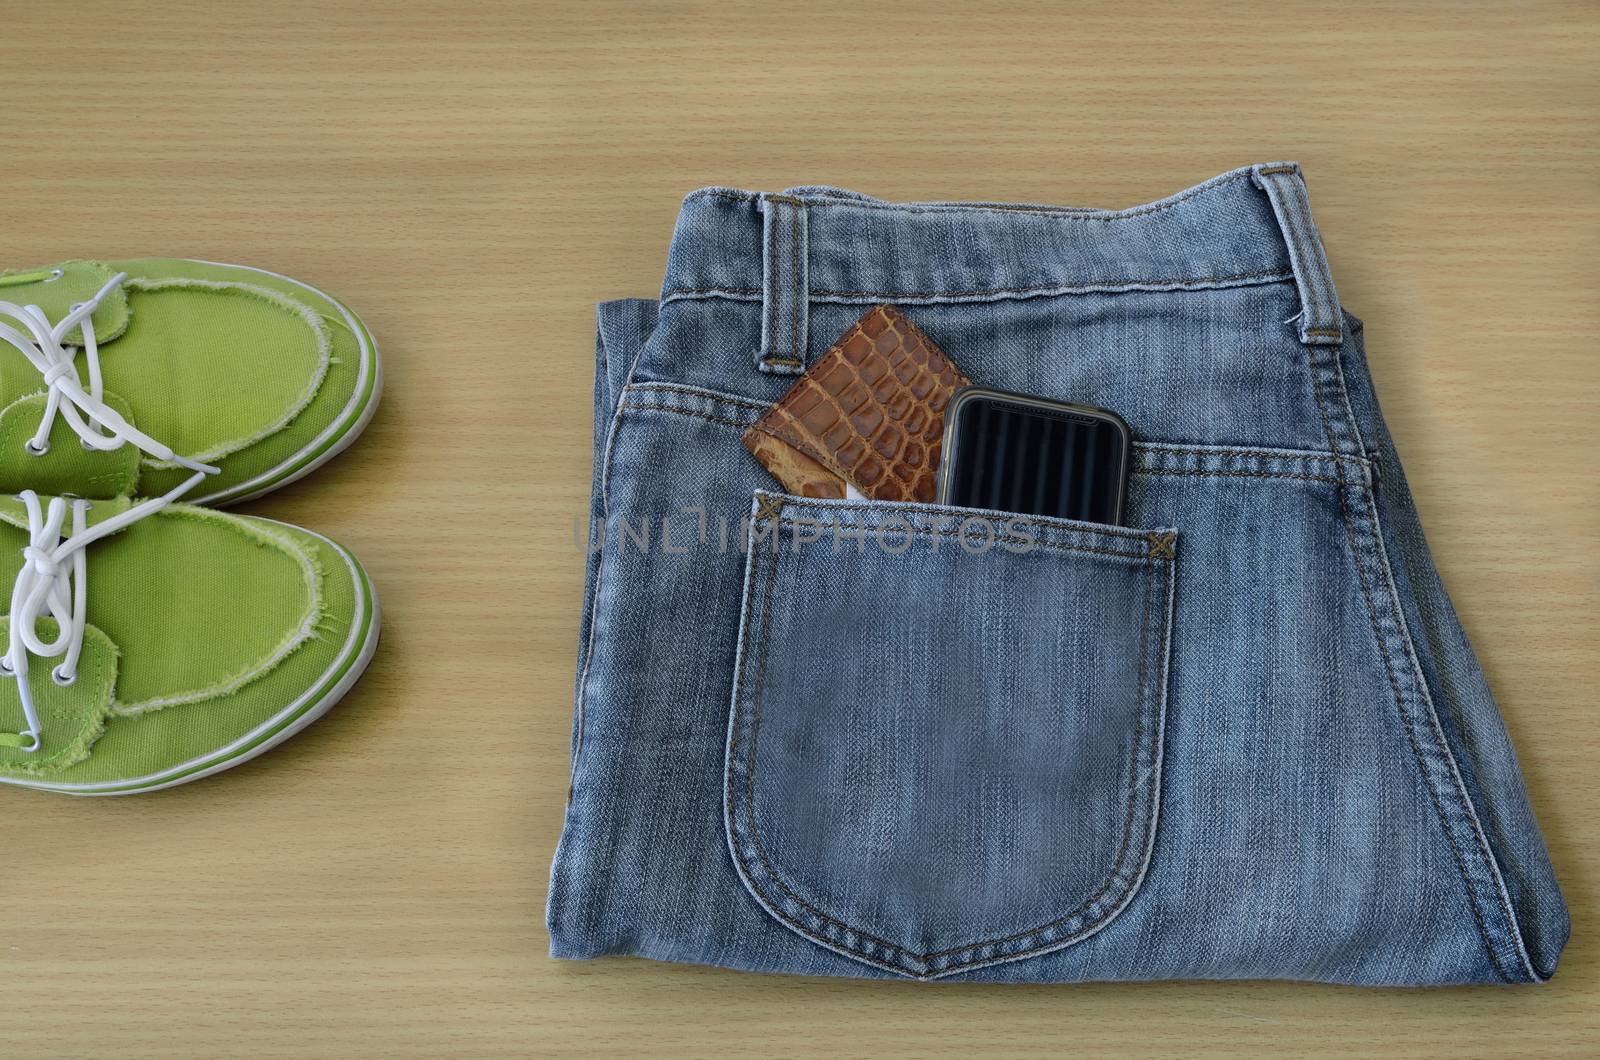 leather wallet and smart phone in jeans pocket by Kheat